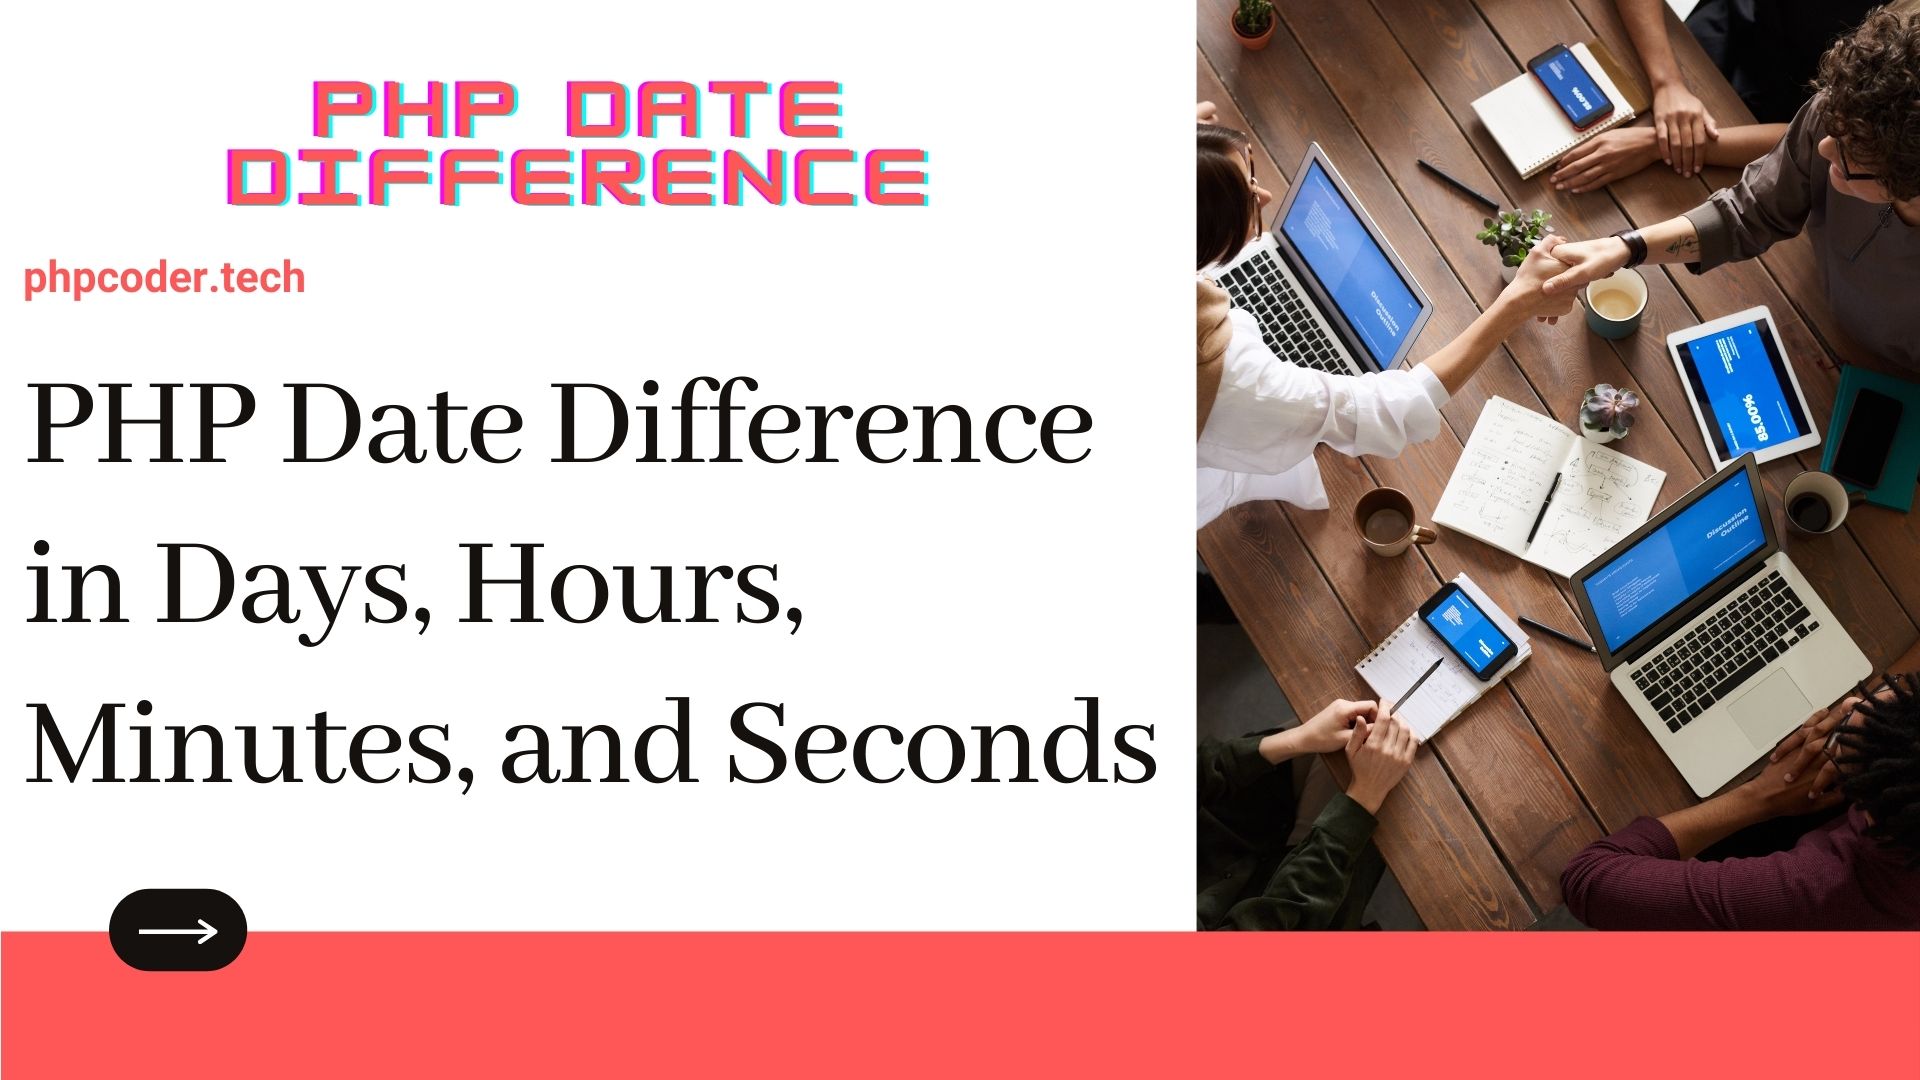 PHP Date Difference in Days, Hours, Minutes, and Seconds